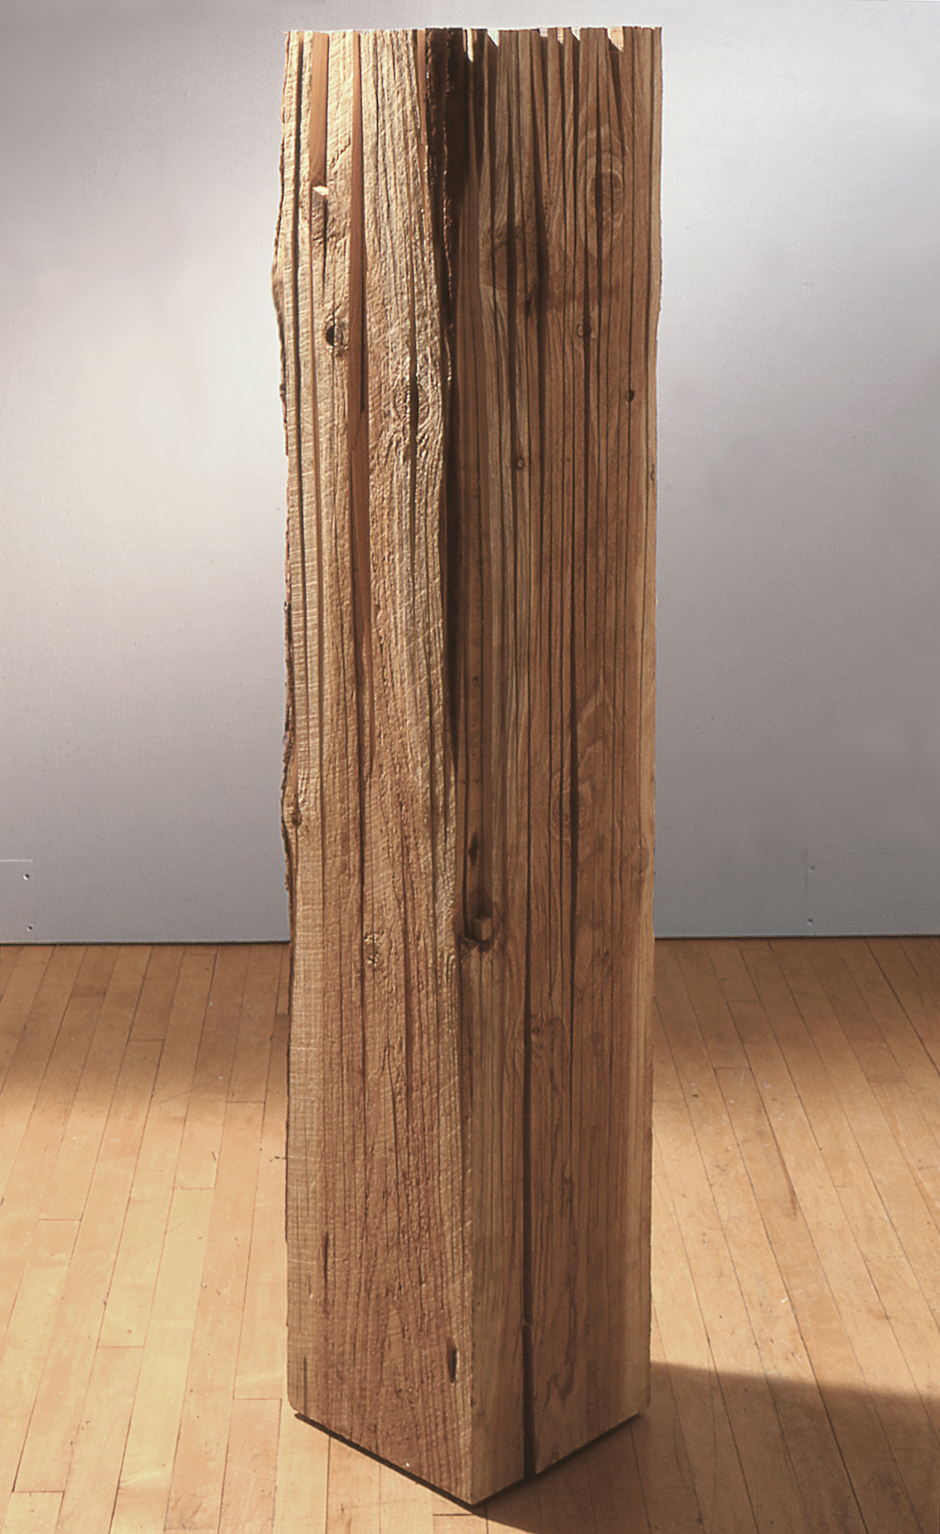 Image of floor standing "Measure VI" sculpture created from bandsawn wood